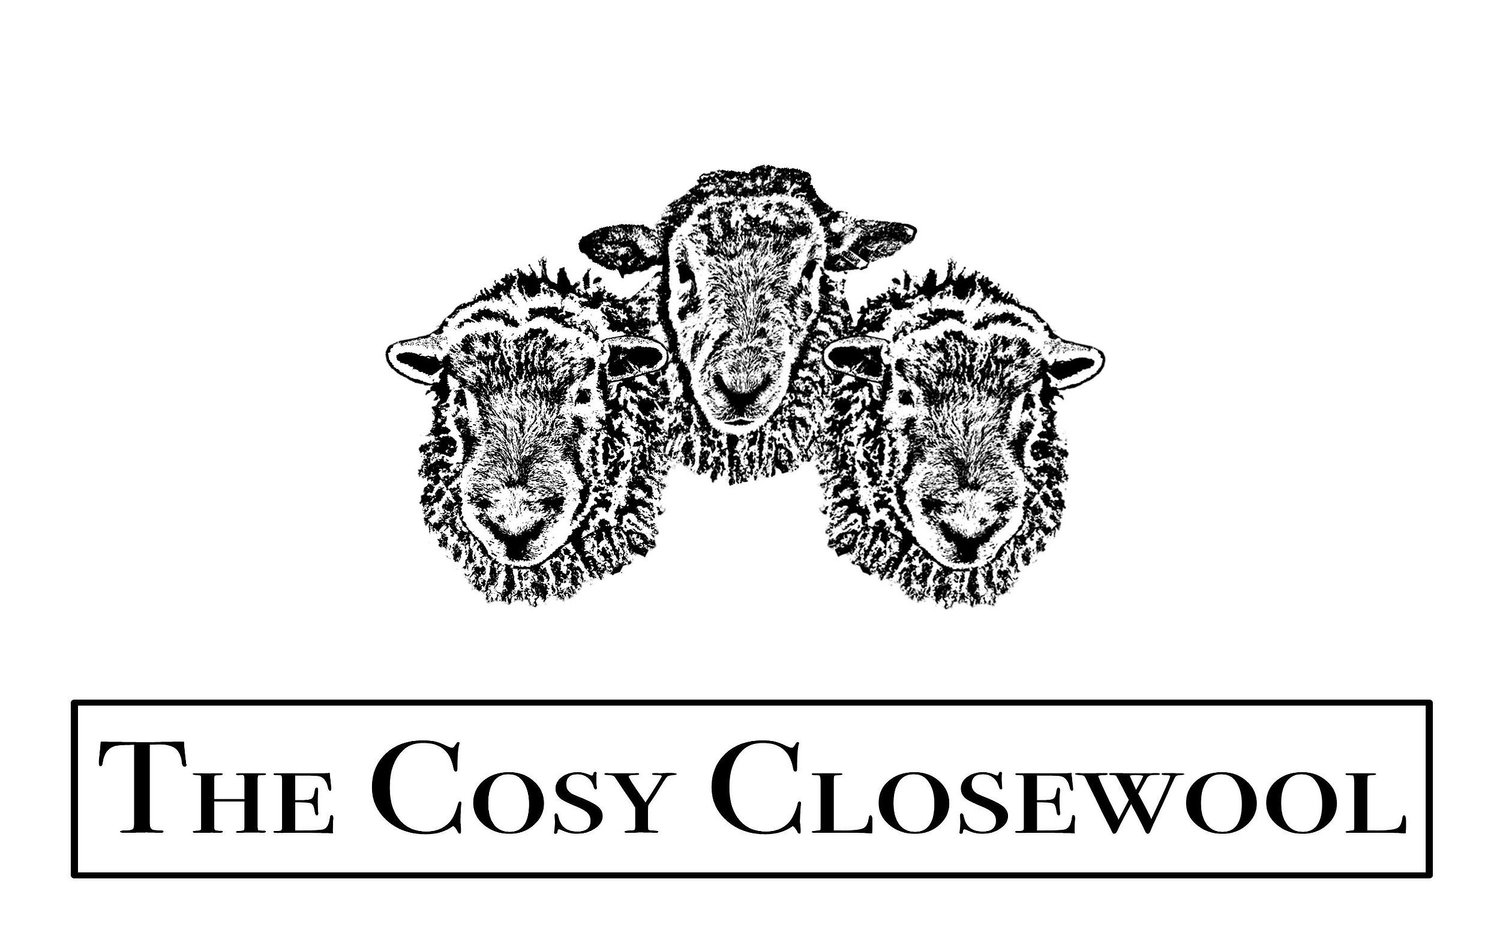 The Cosy Closewool